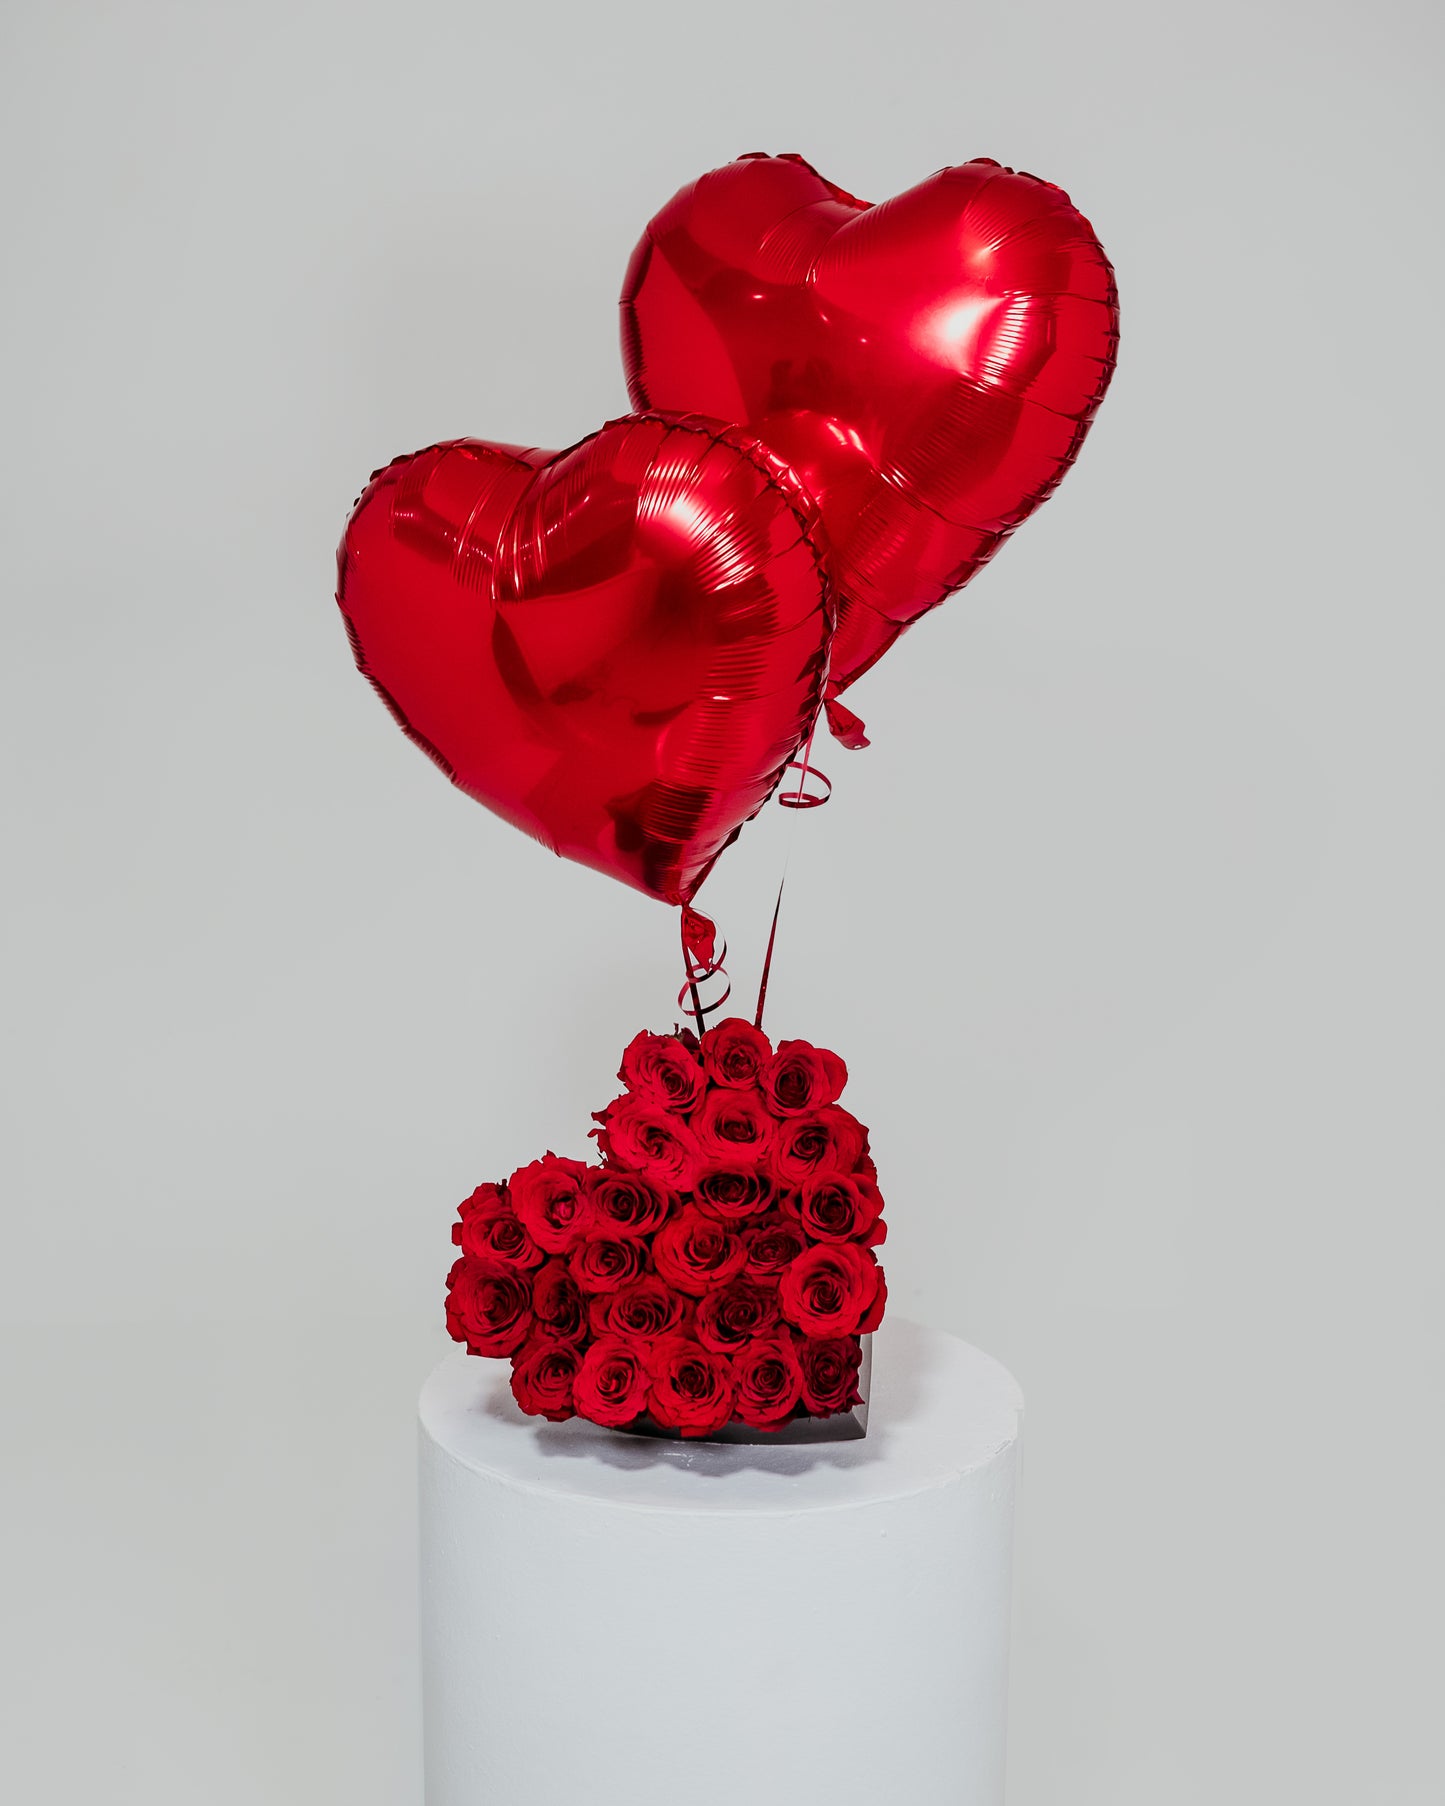 Medium 2D Heart of Roses with 2 Balloons